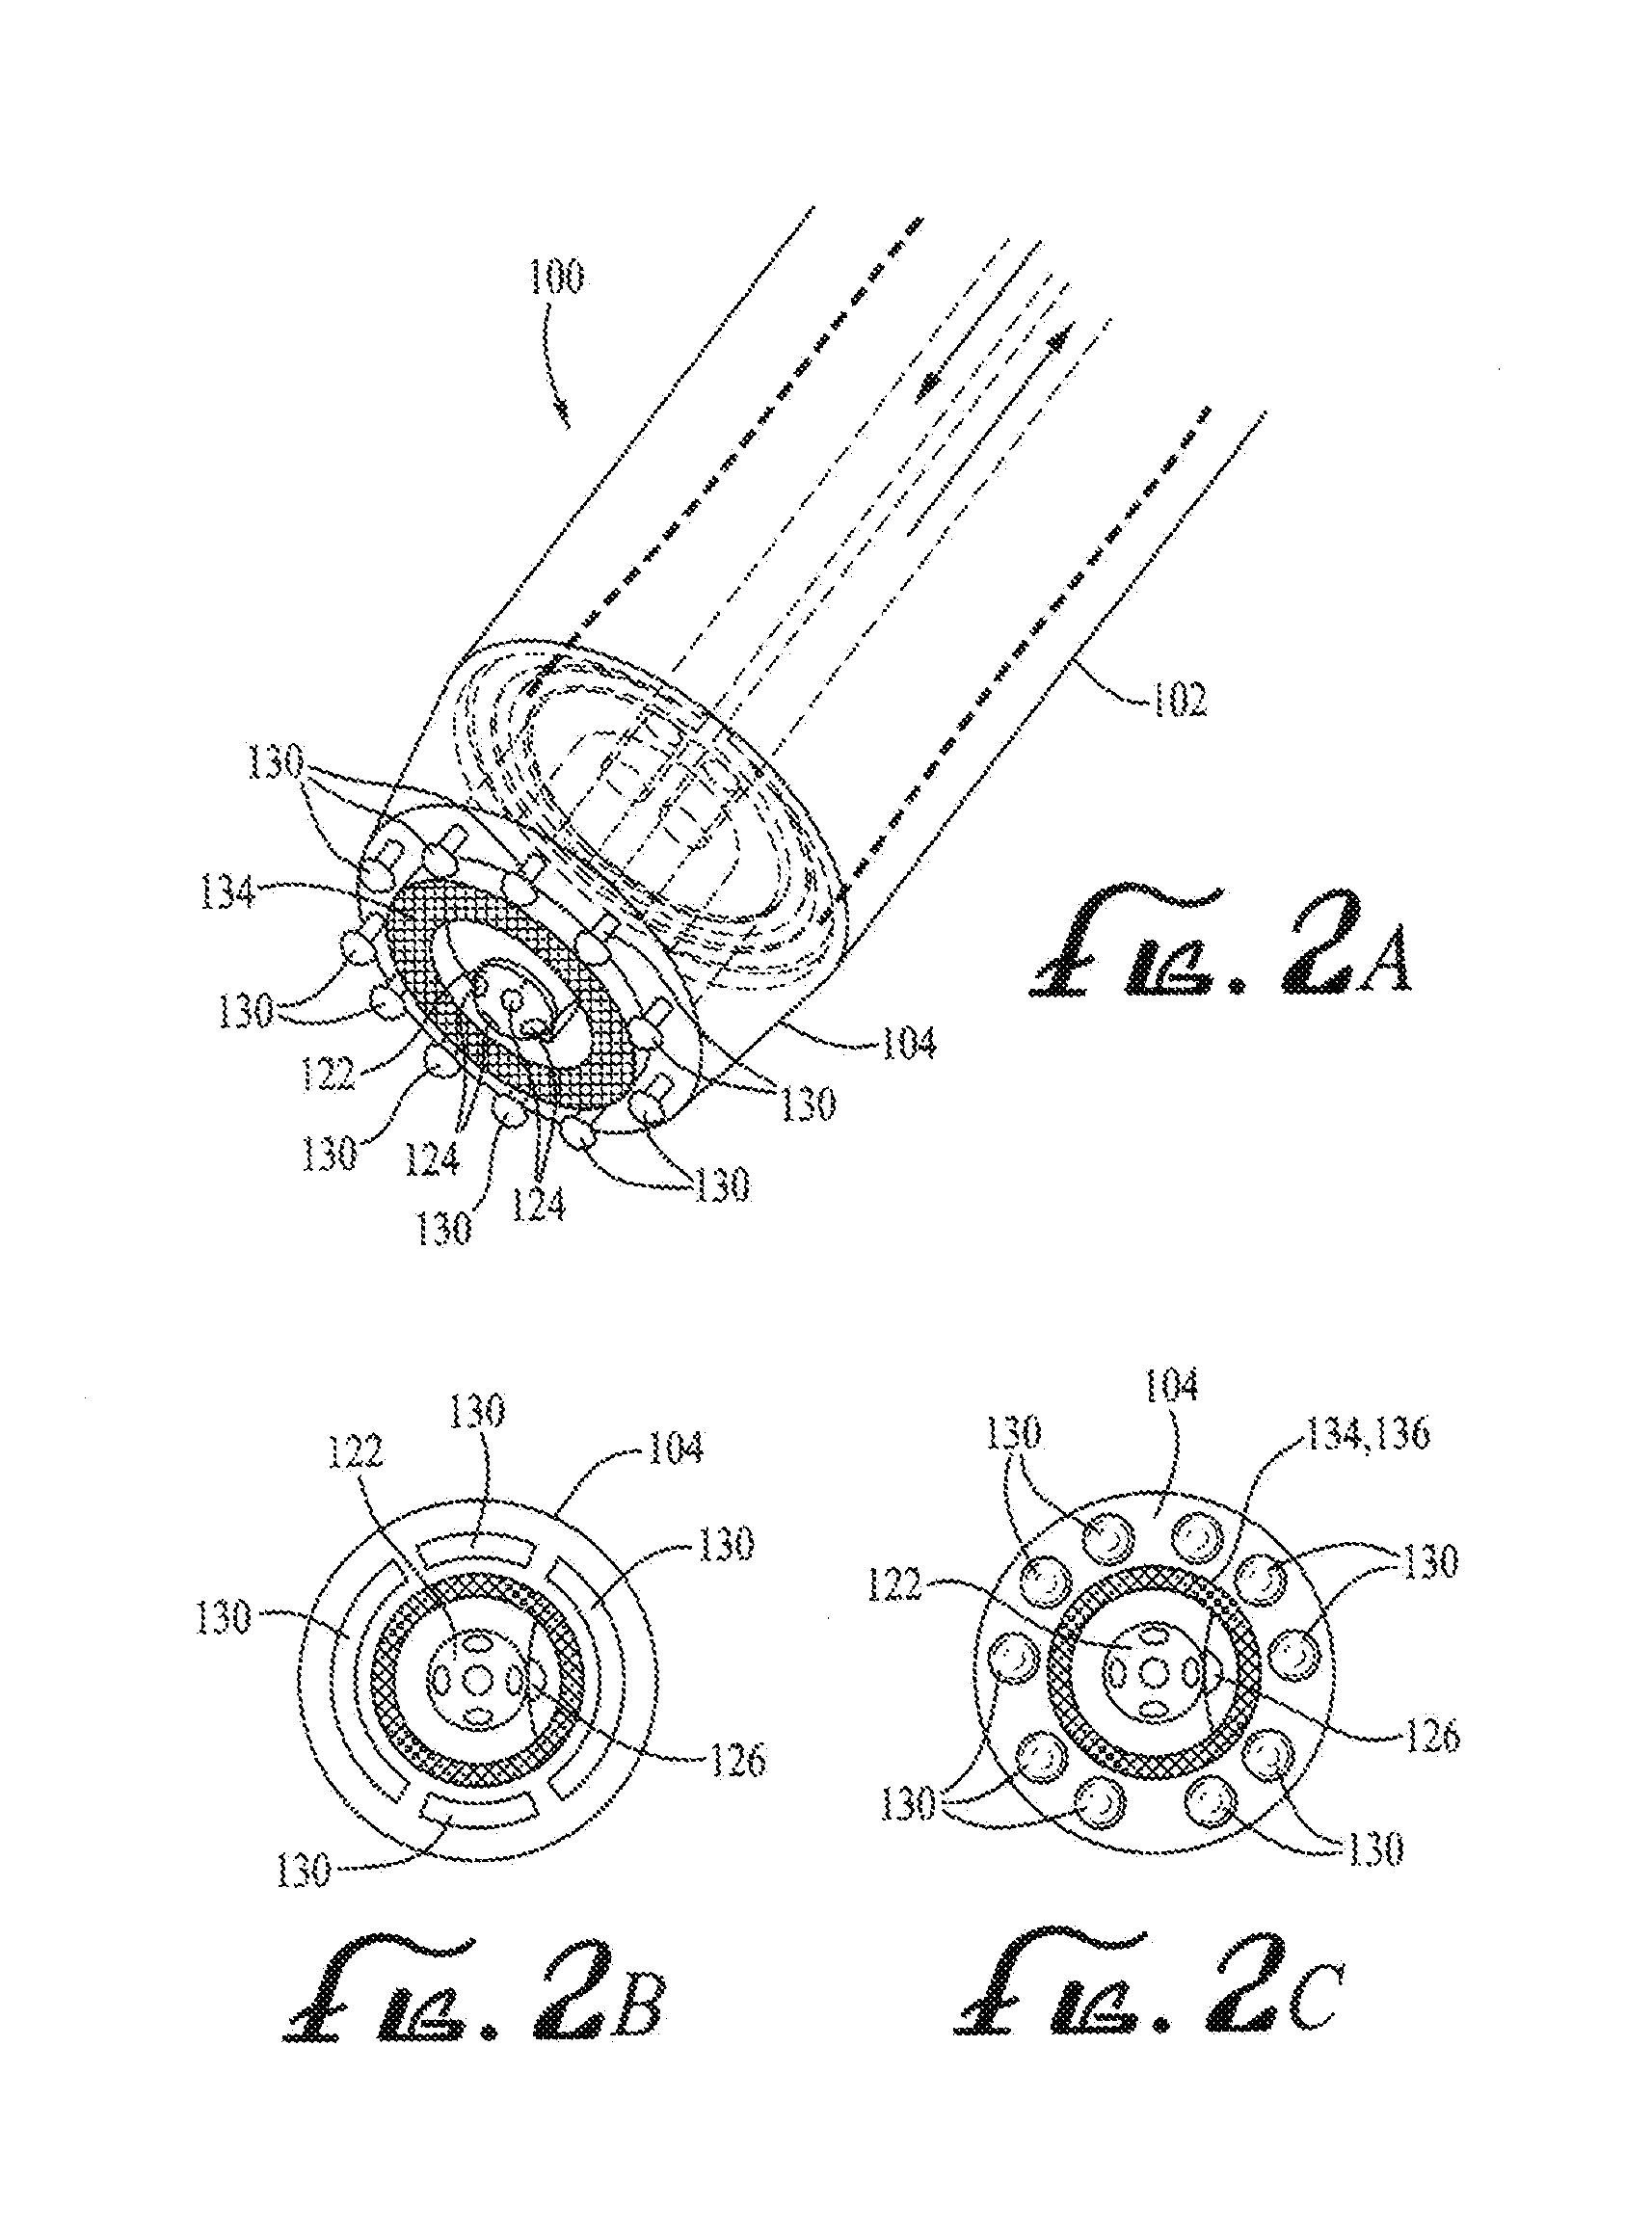 Apparatus and Method for Transdermal Fluid Delivery